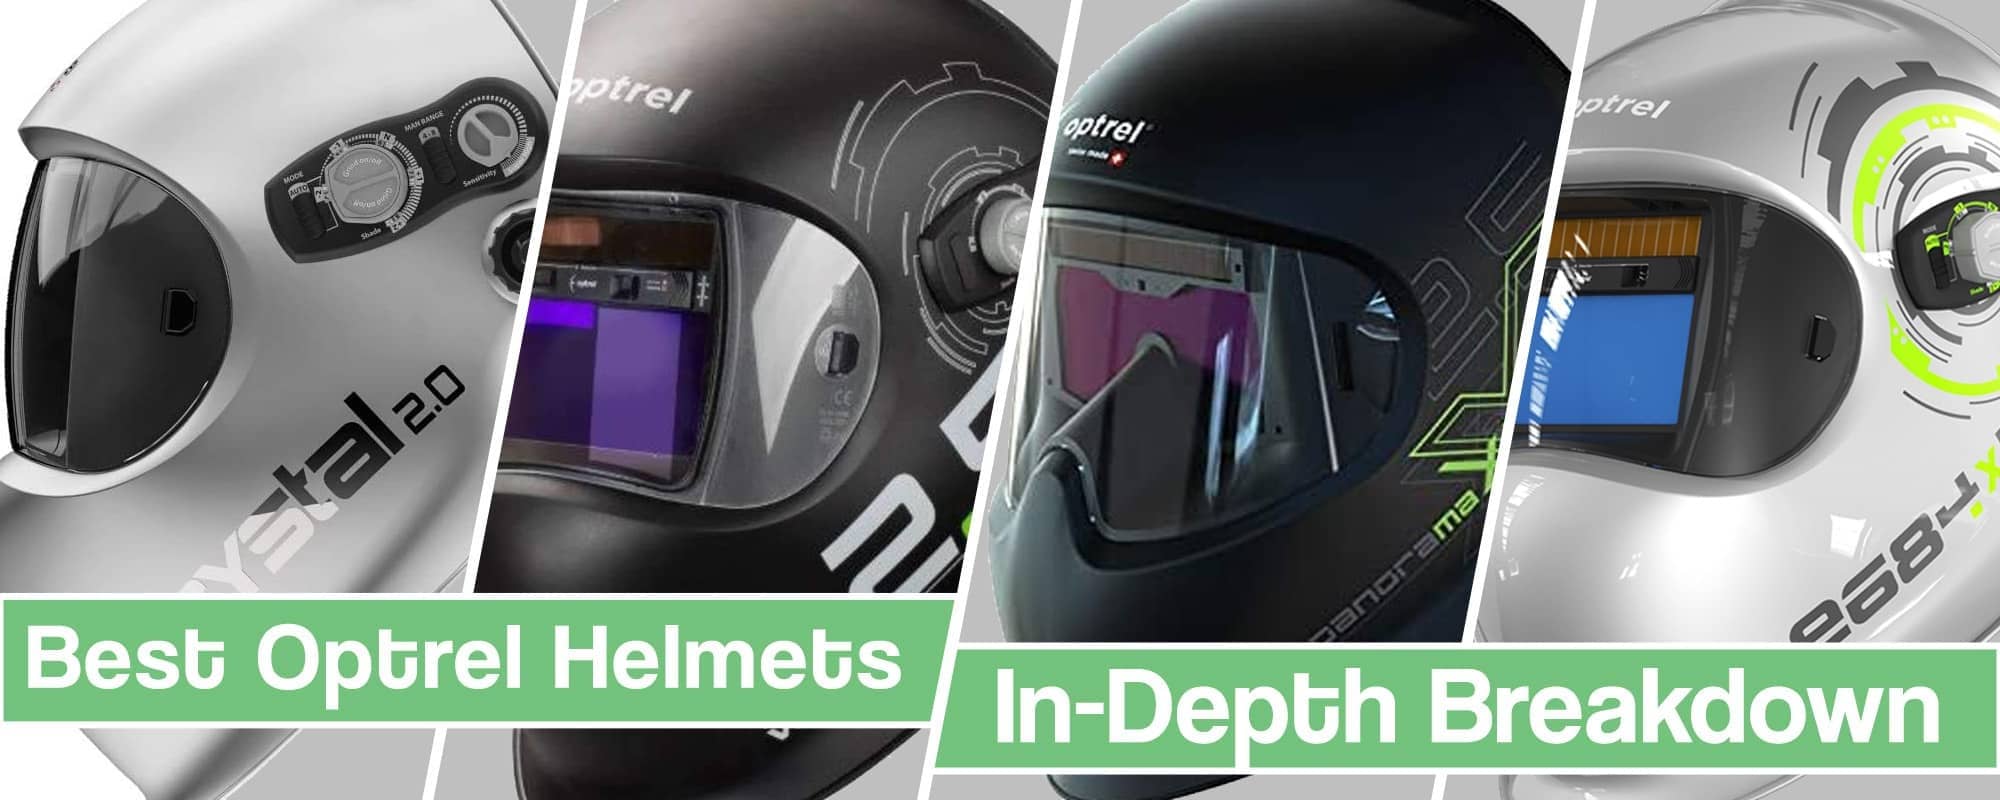 Best Optrel Welding Helmet Reviews – Extensive Guide, Specifications and Pros & Cons 2022